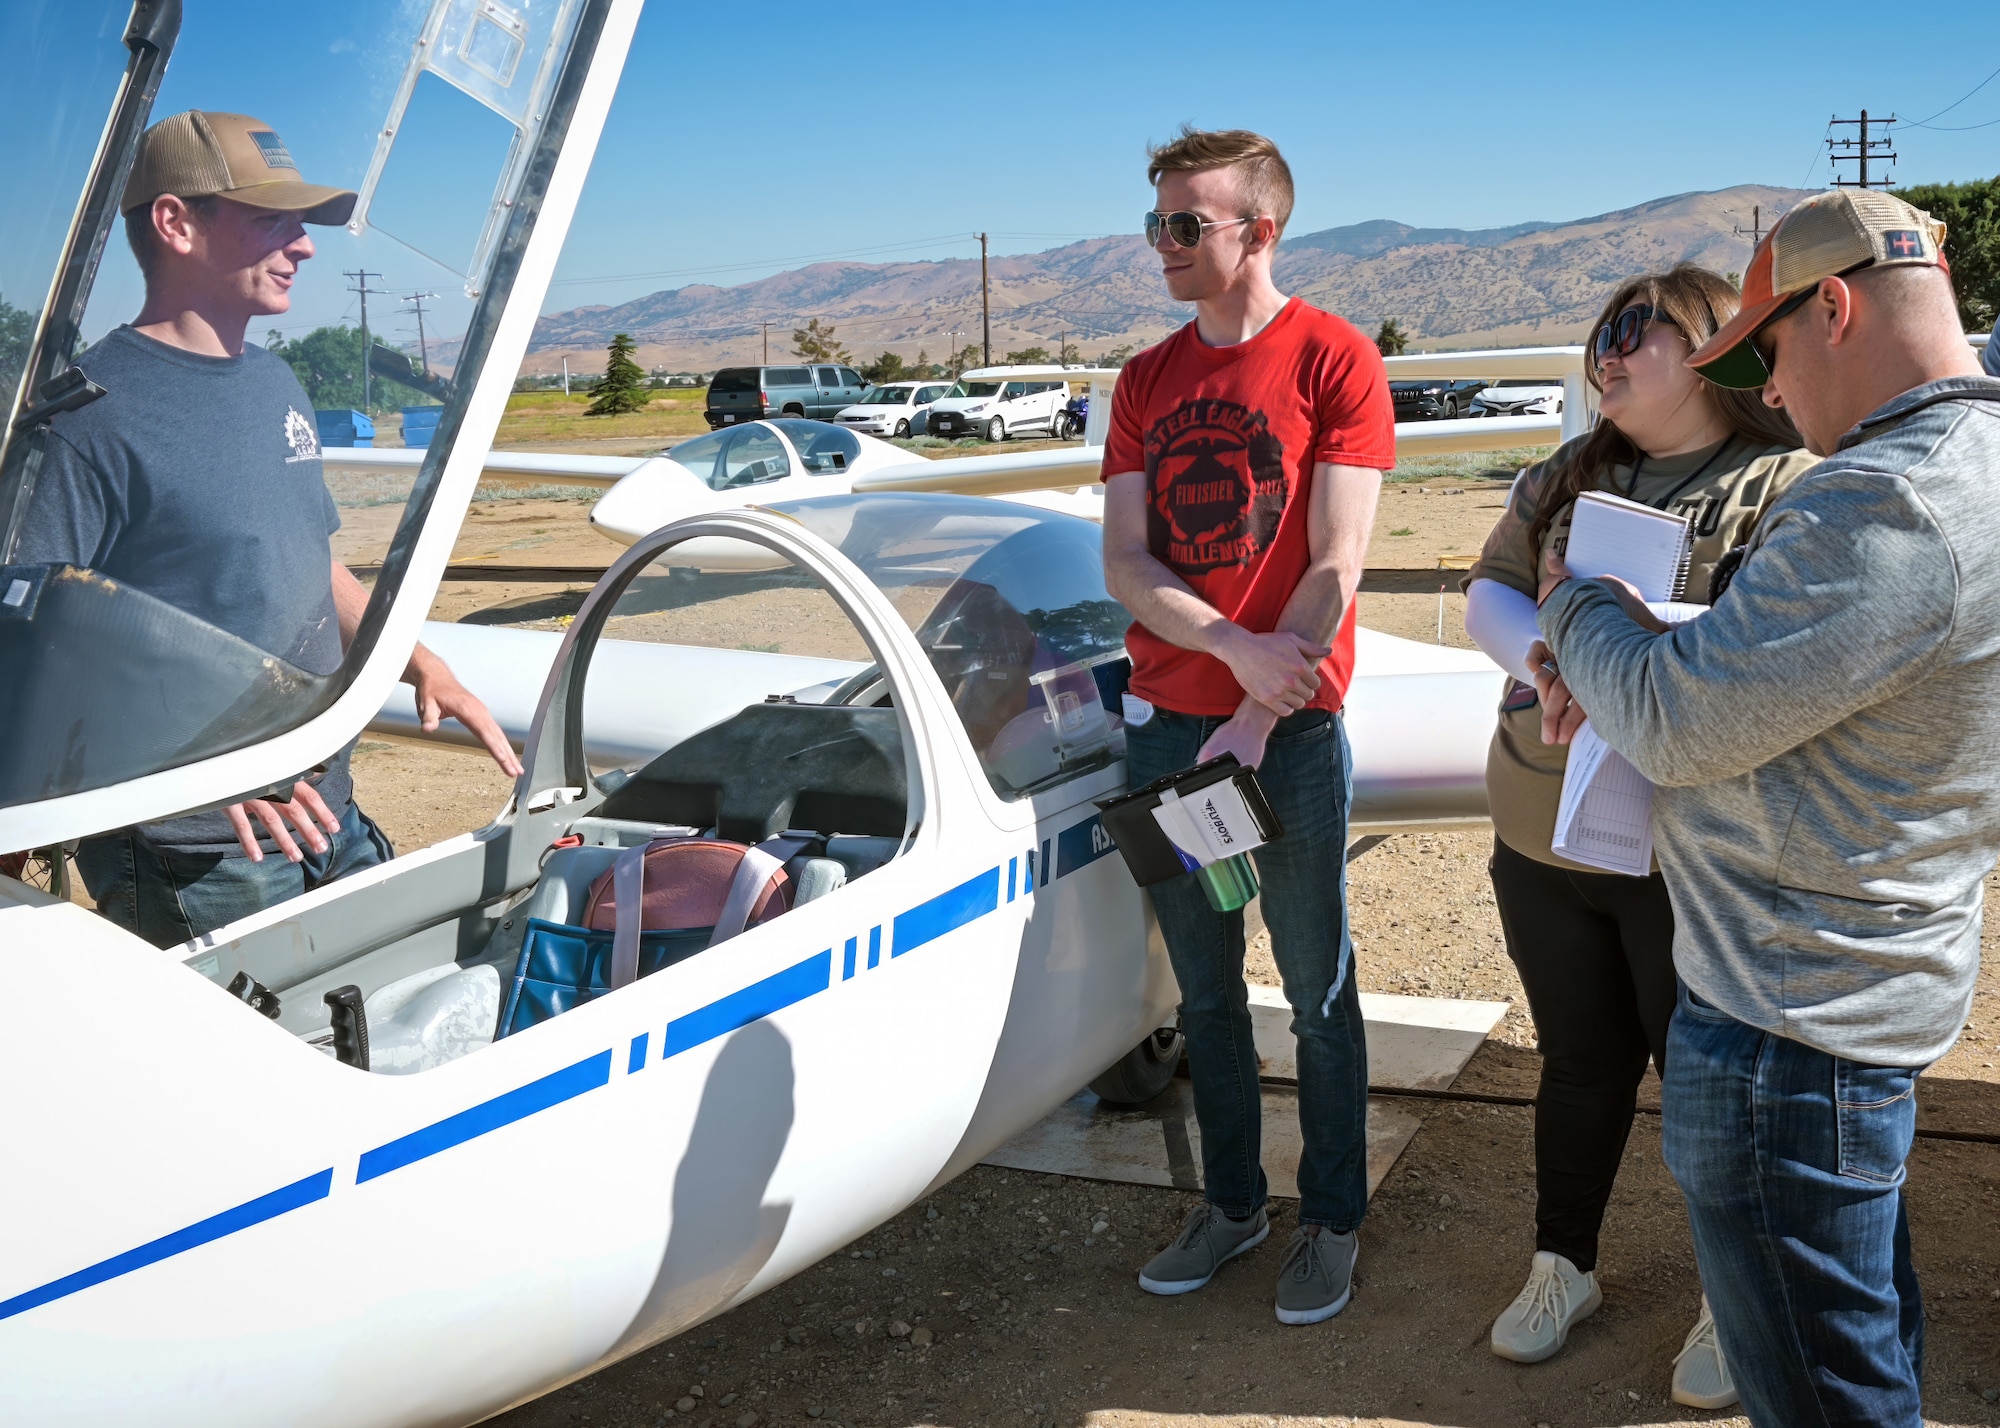 A group of 412th Test Wing personnel receive a pre-flight brief on a glider during inaugural Glider Orientation Program class at Mountain Valley Airport, Tehachapi, June 22. The program is designed to better integrate and immerse newer engineers into the Edwards Air Force Base flight test mission. (Air Force photo by Giancarlo Casem)